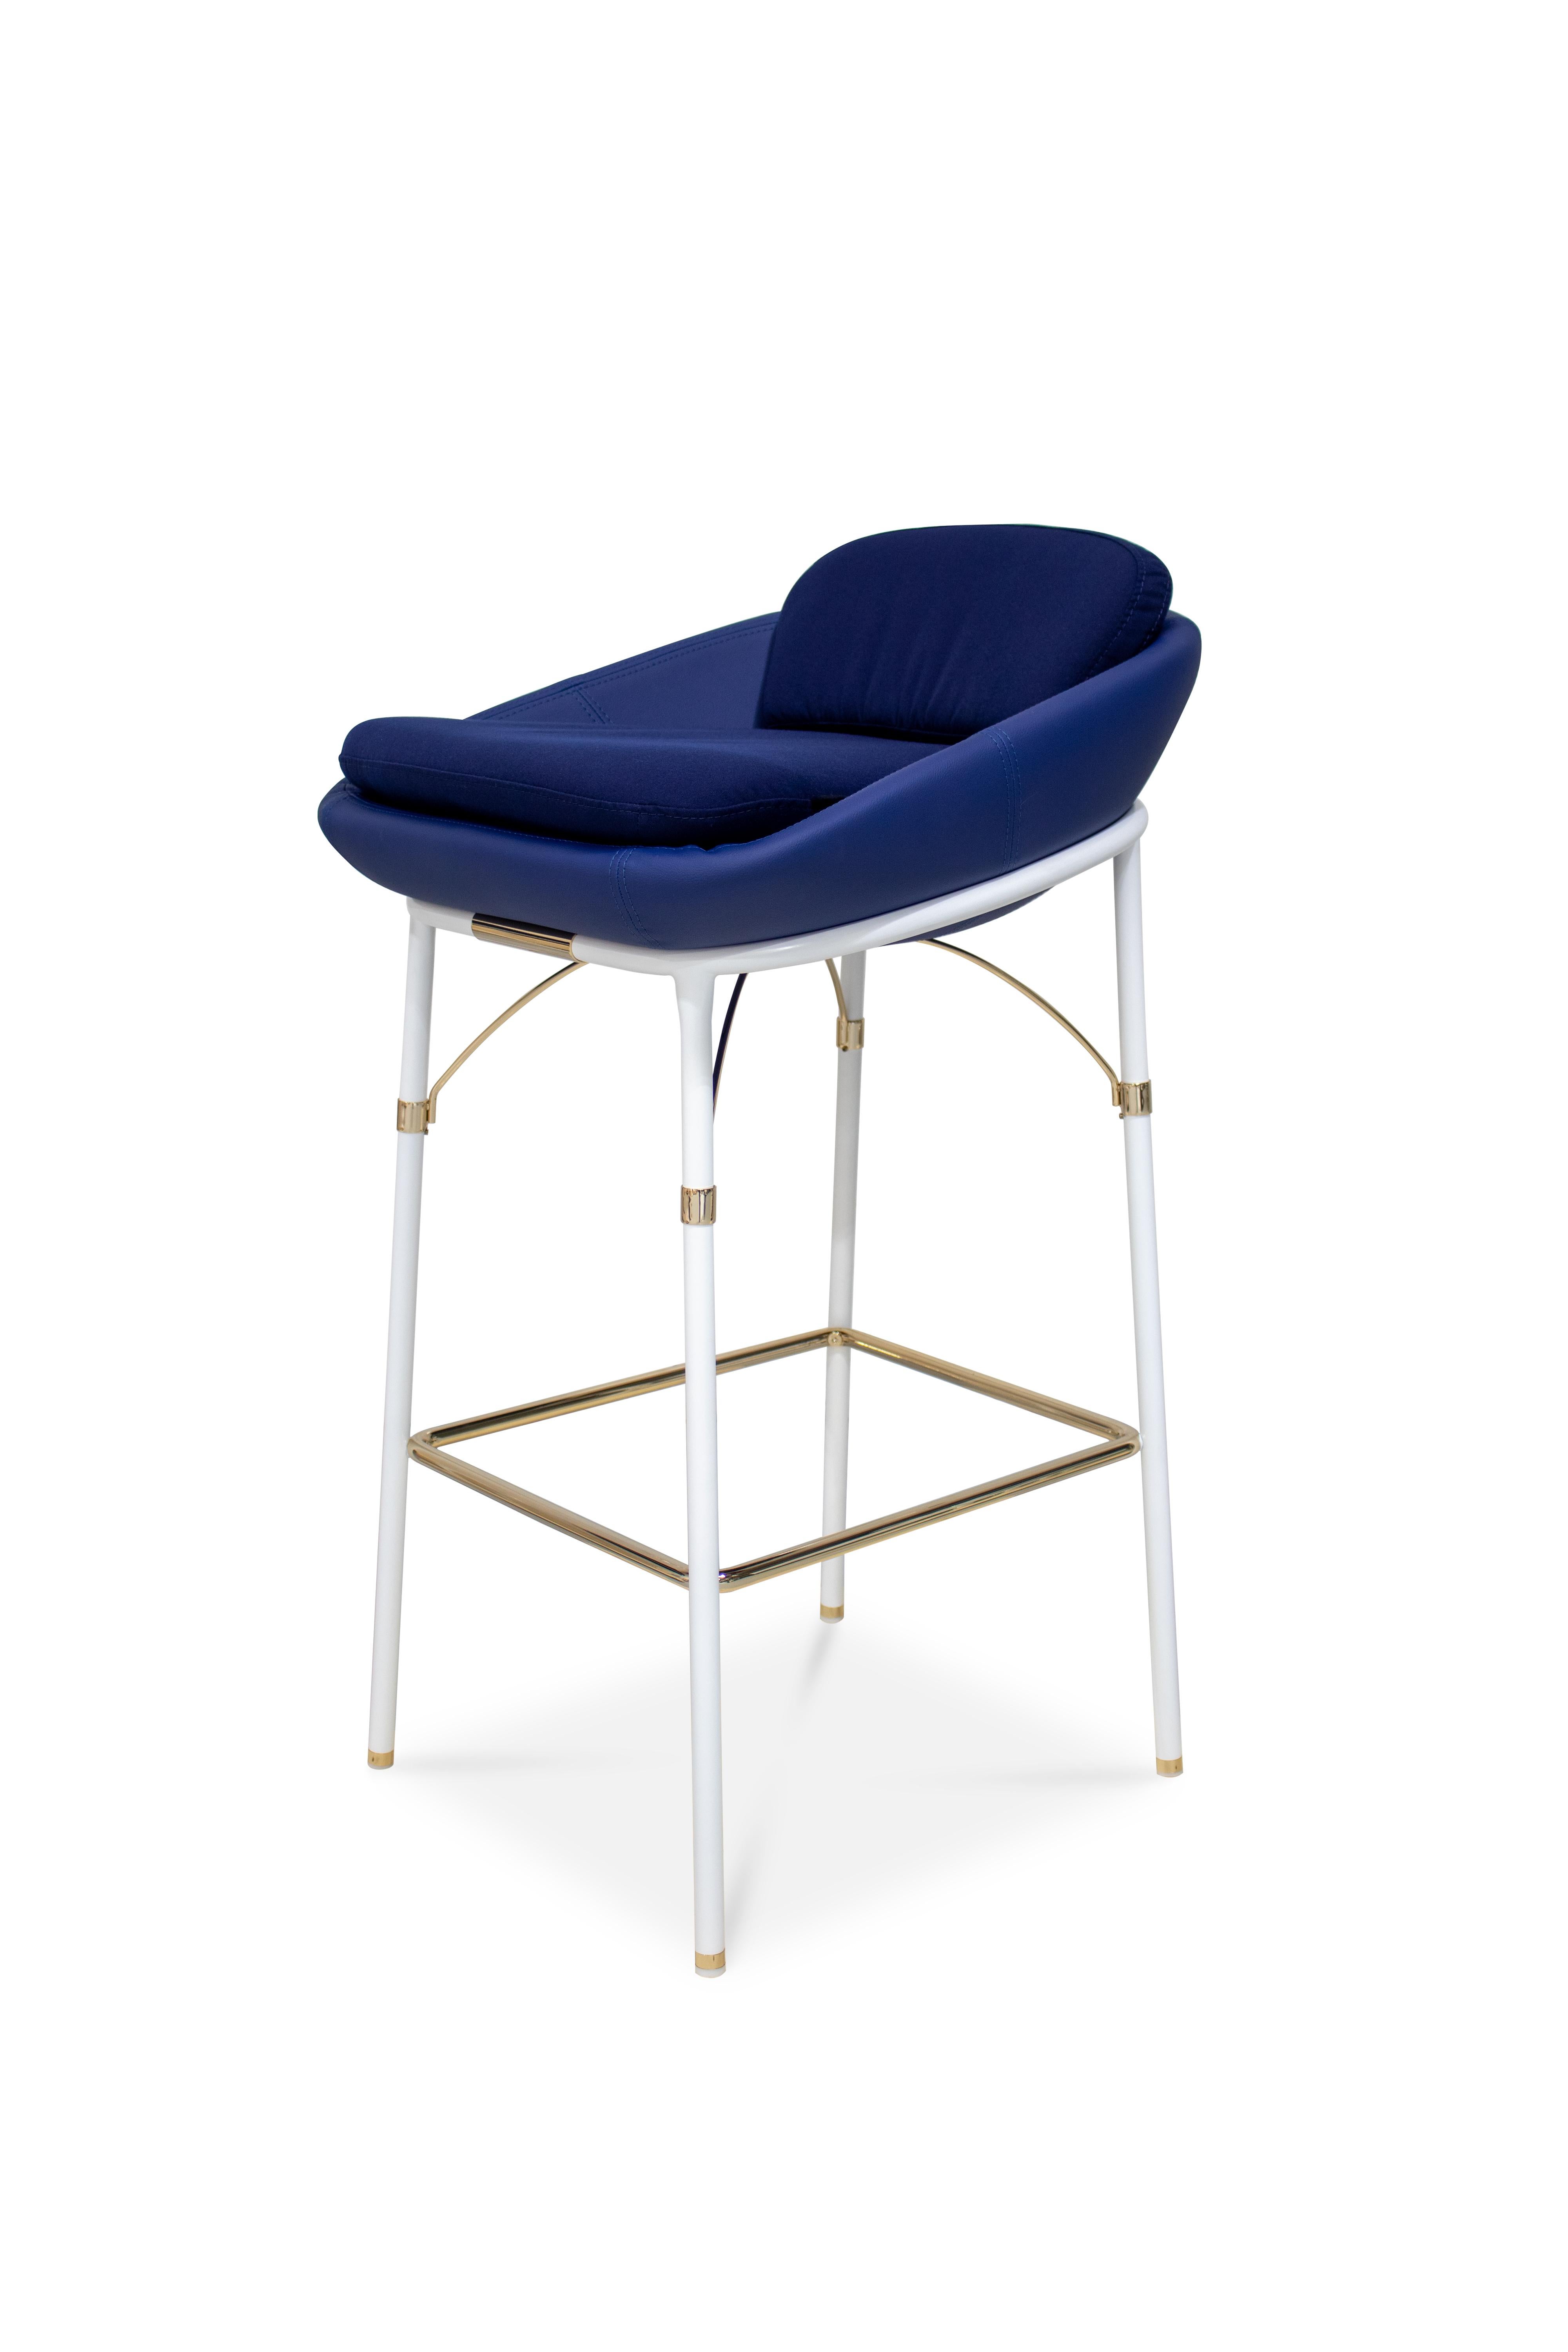 Nero Outdoor Bar Chair

The Nero outdoor bar chair and its customization possibilities have the capability of transforming an outdoor bar or dining area into the most sophisticated space possible.

The whole design of this modern outdoor bar chair